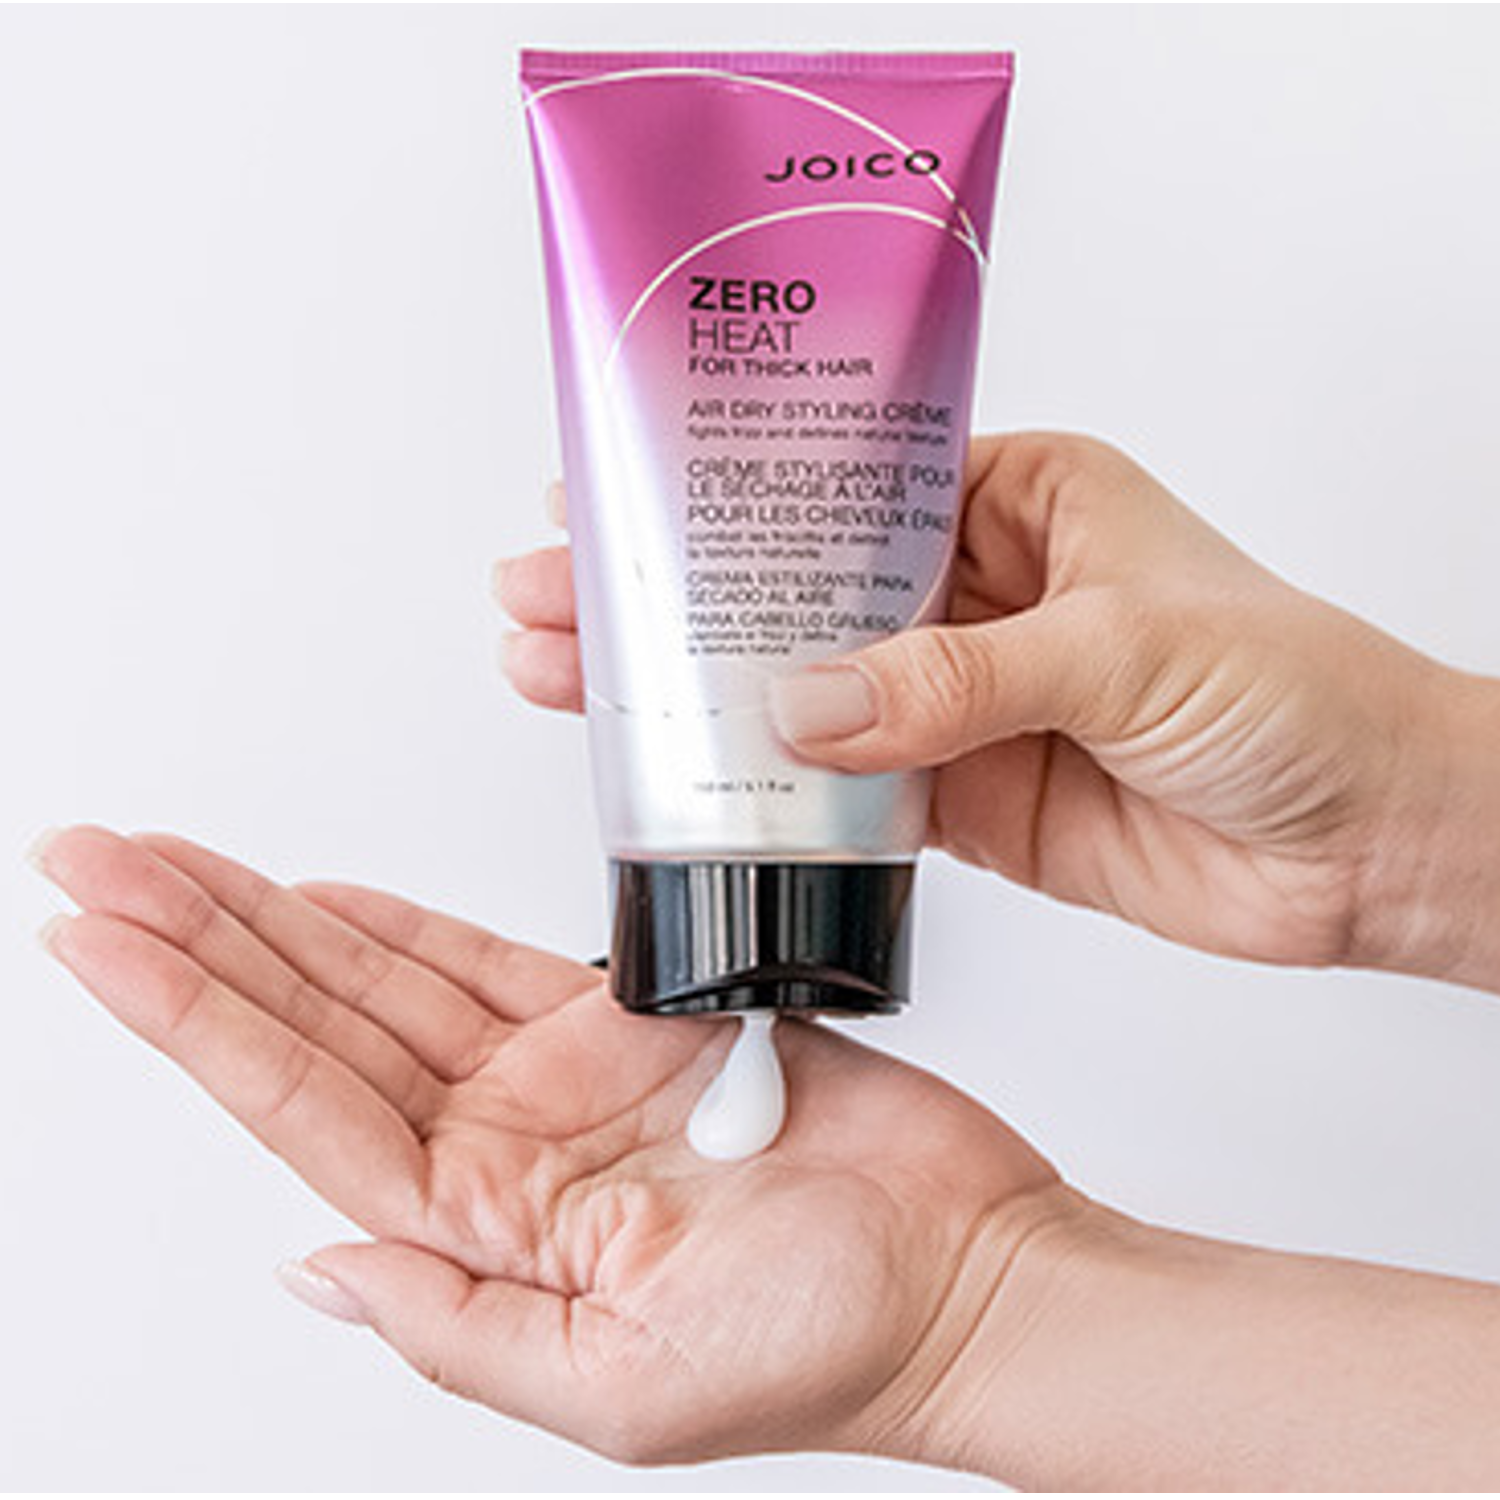 Zero Heat Air Dry Styling Creme for Thick Hair Texture